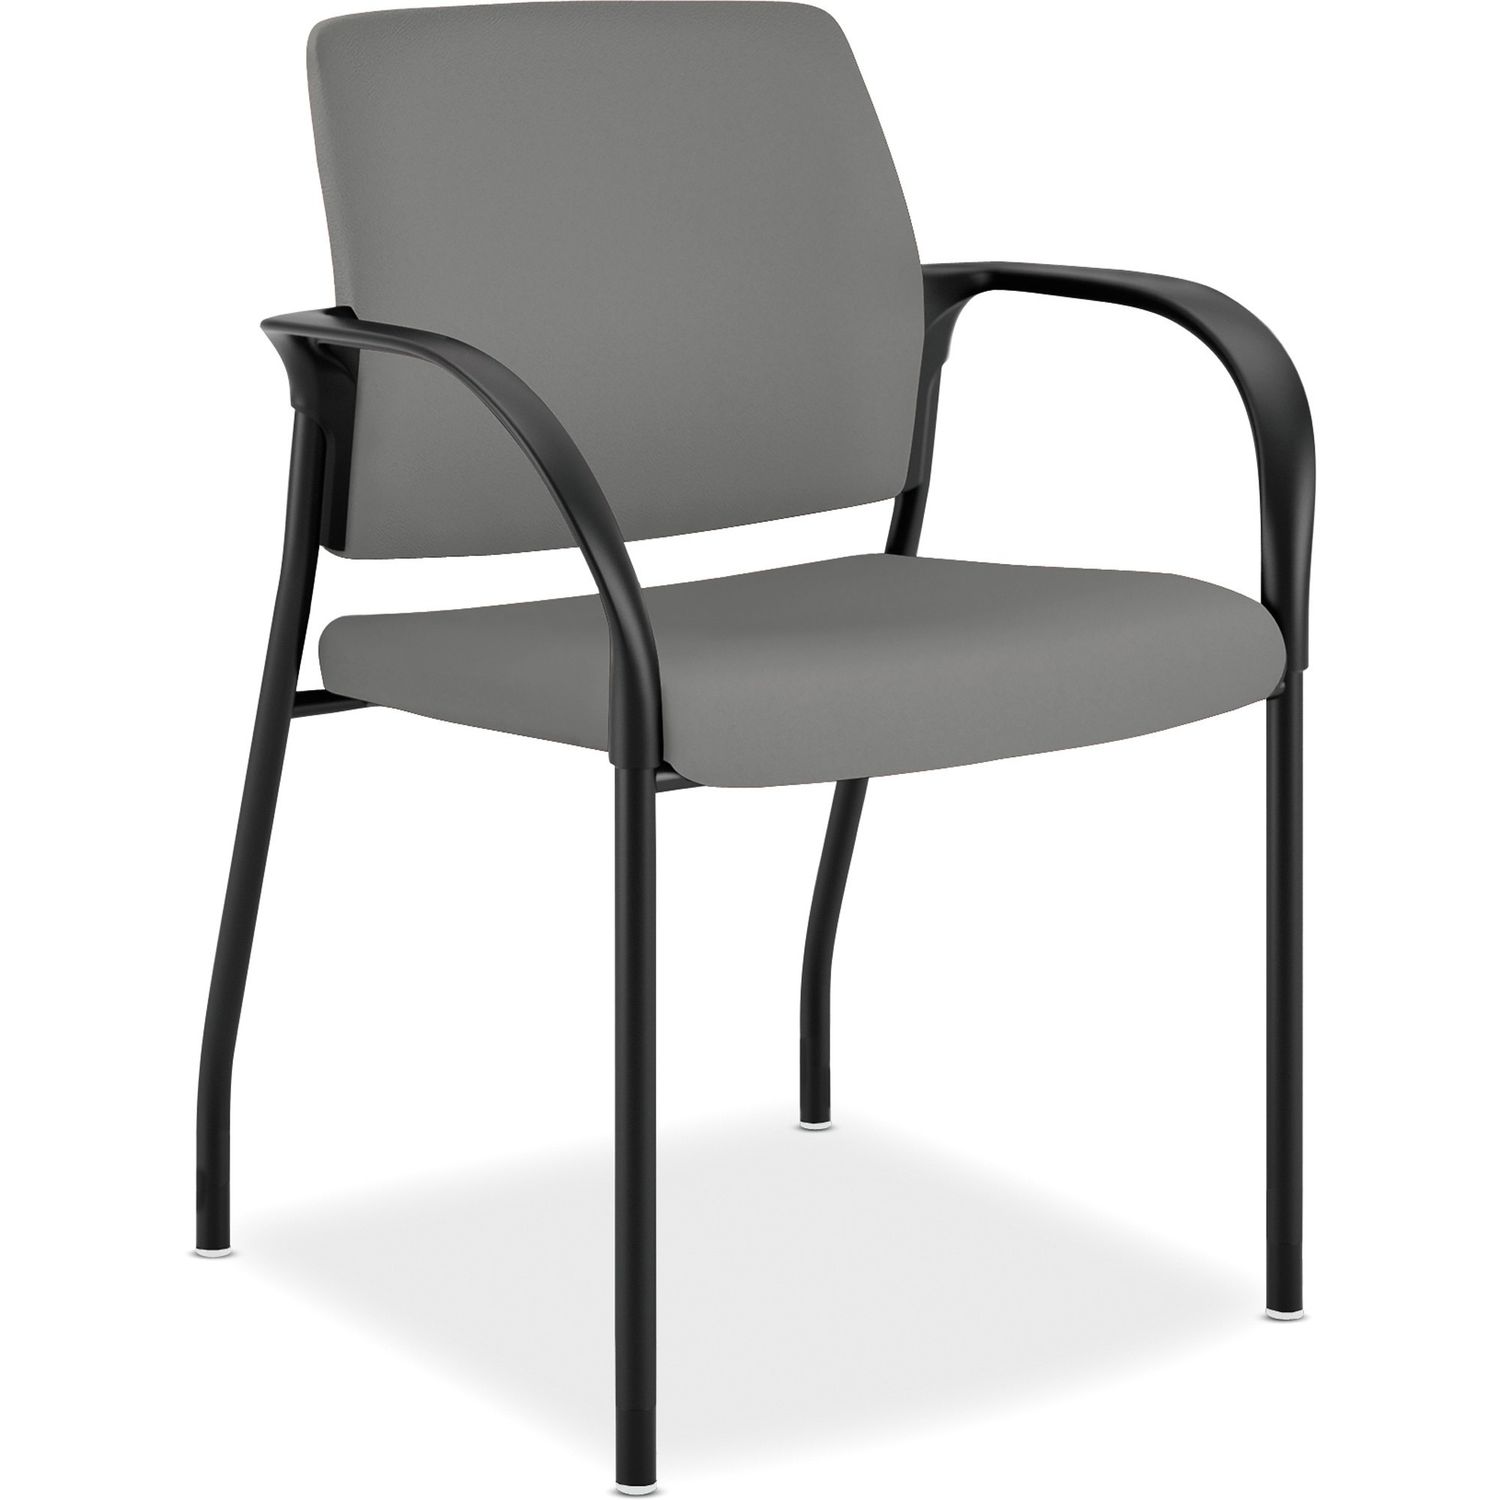 Ignition 4-Leg Stacking Chair Frost Fabric Seat, Frost Fabric Back, Steel Frame, Four-legged Base, 1 Each